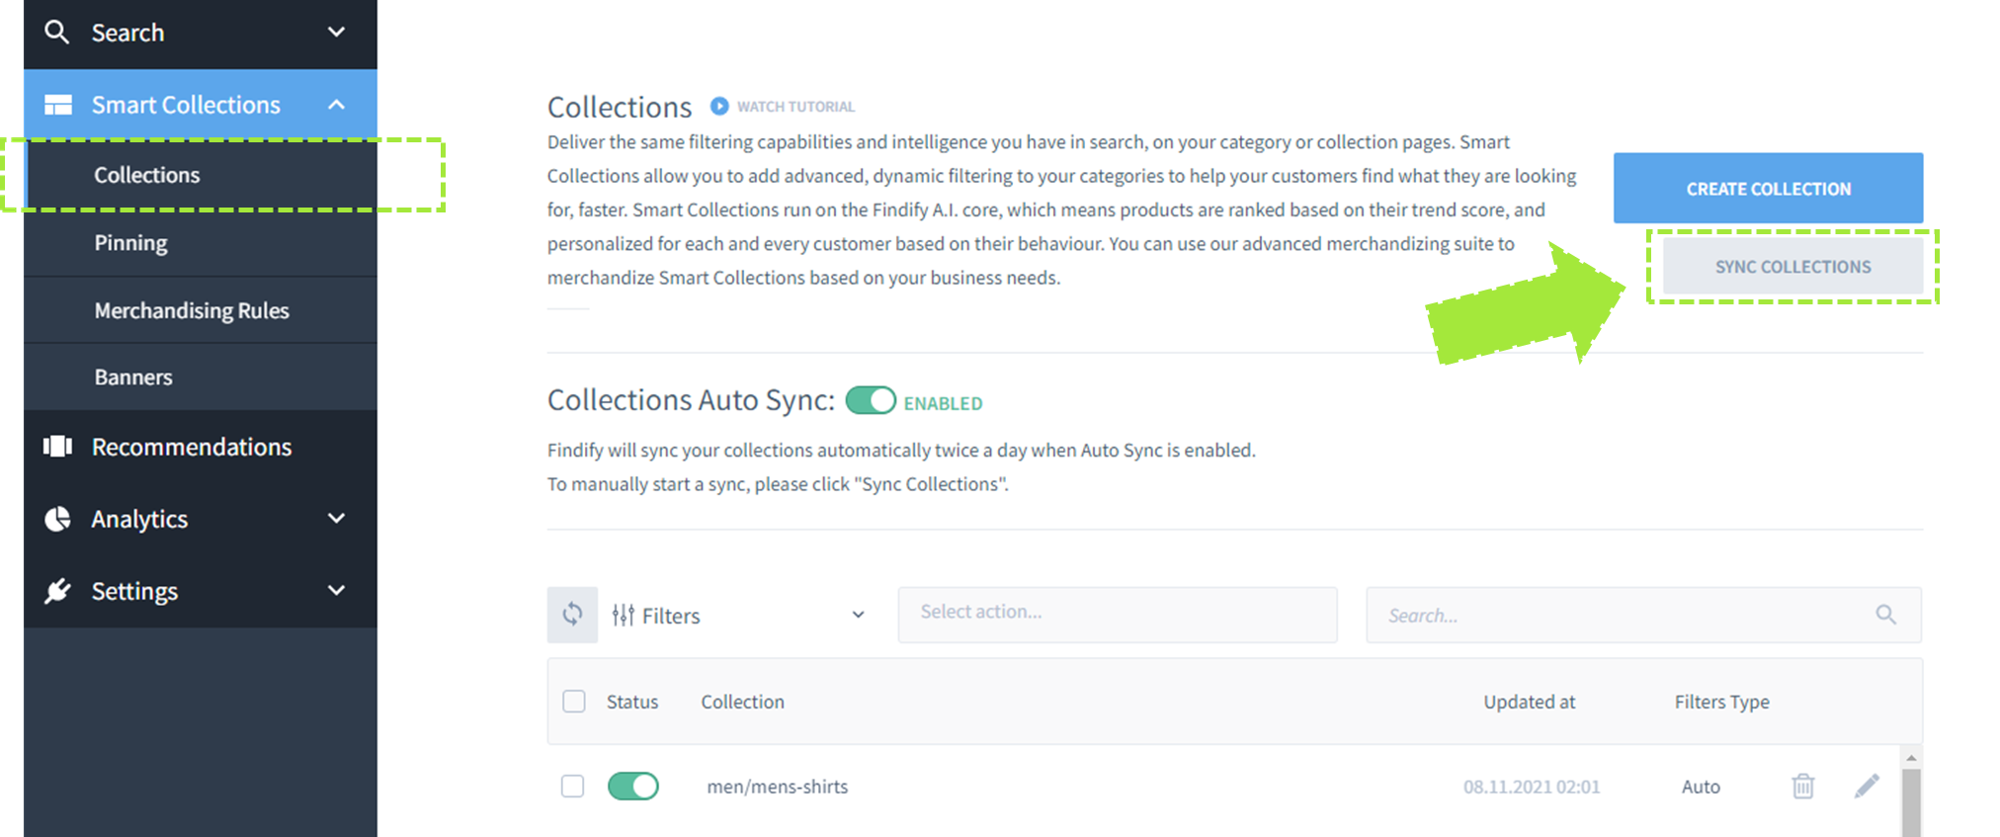 Click "Sync Collections" in the dashboard to trigger a sync.